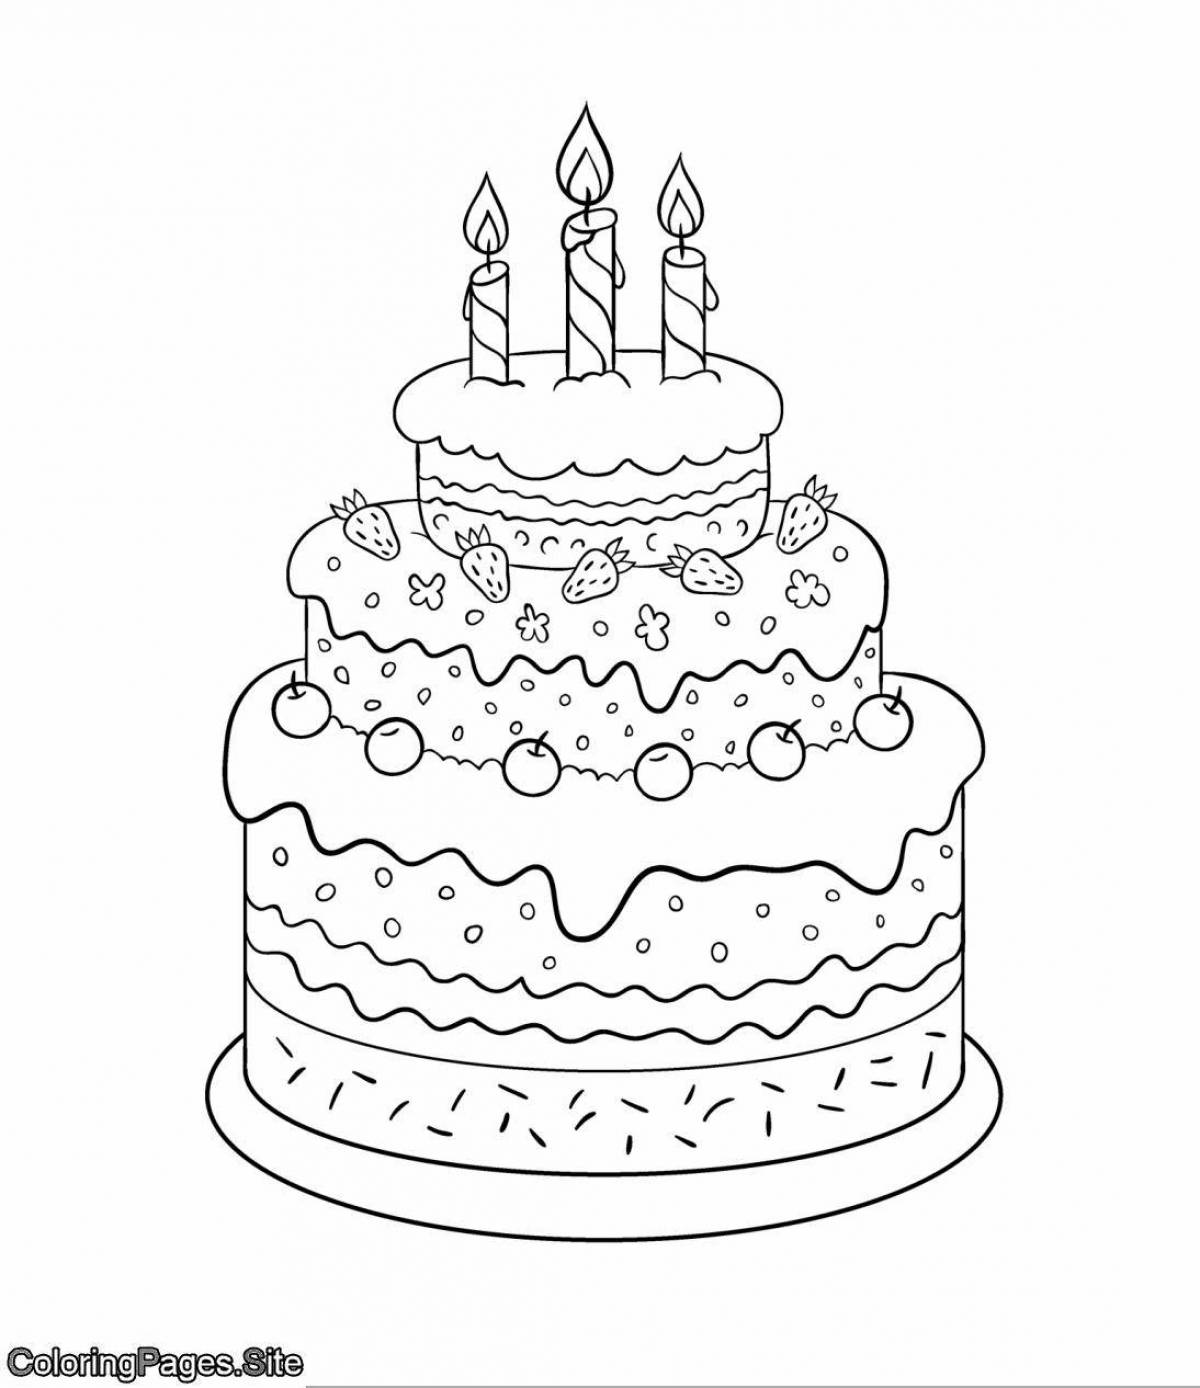 Playful cake coloring page